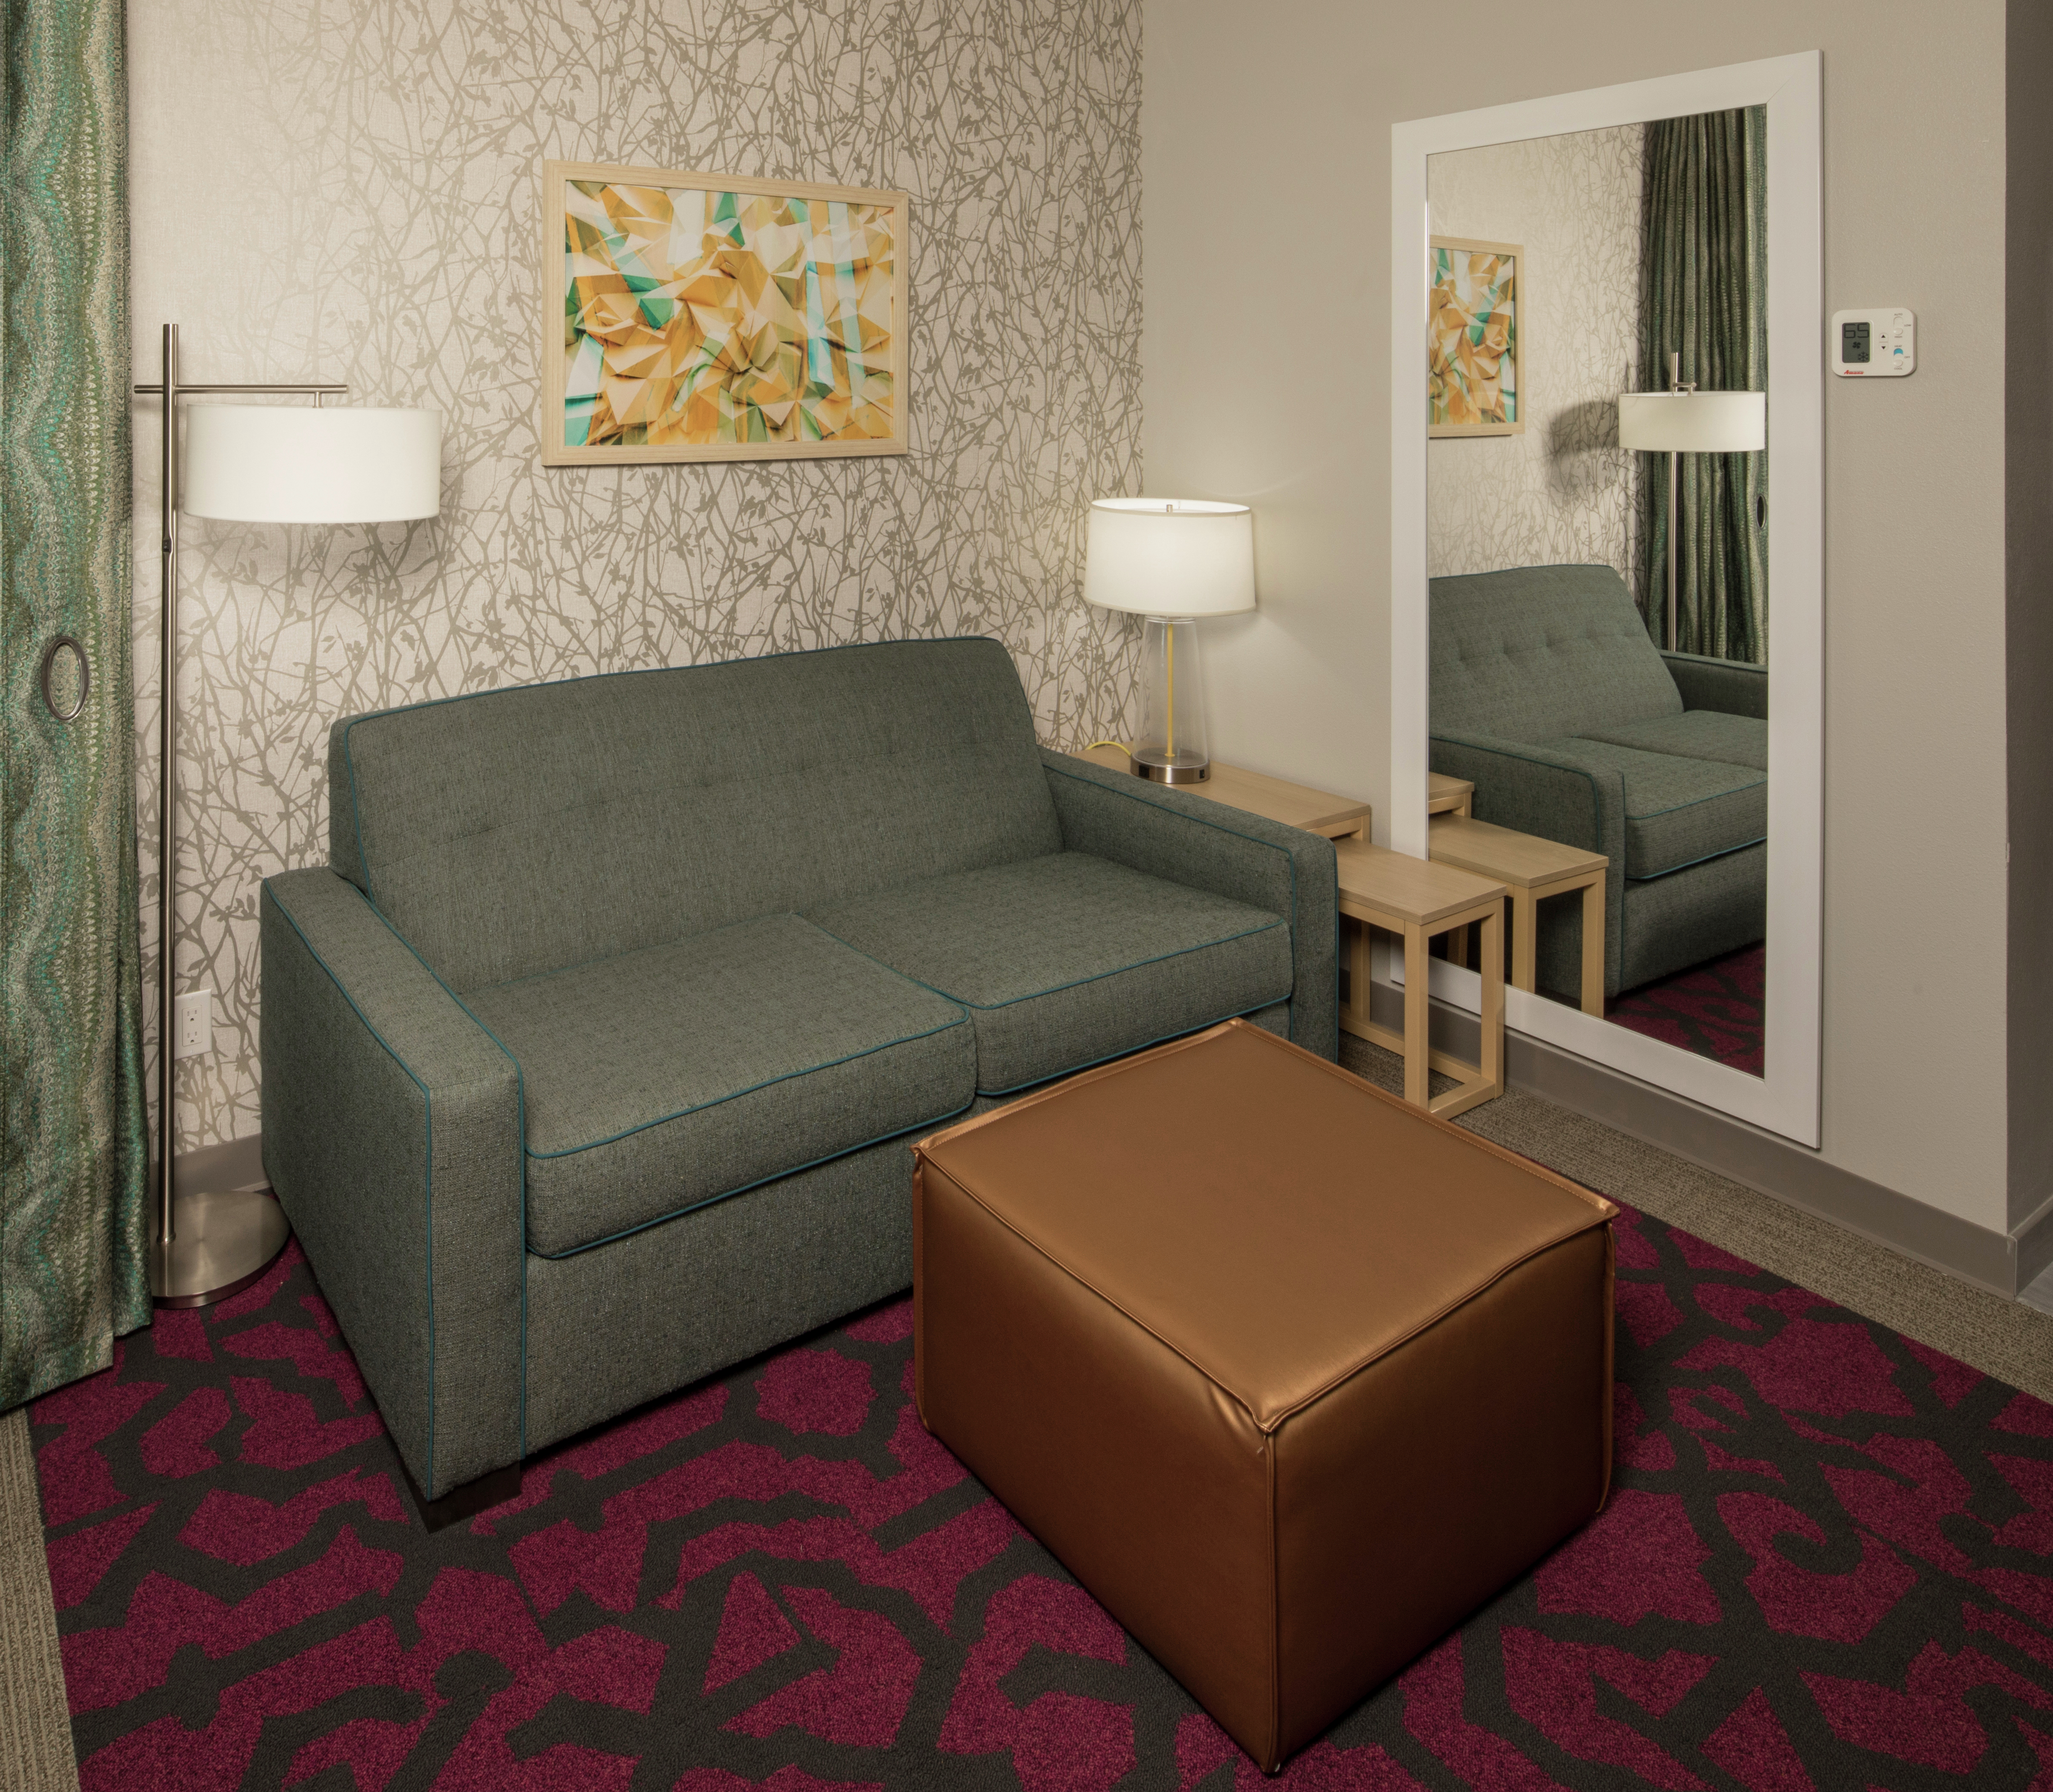 Guestroom Lounge Area with Sofa and Footrest